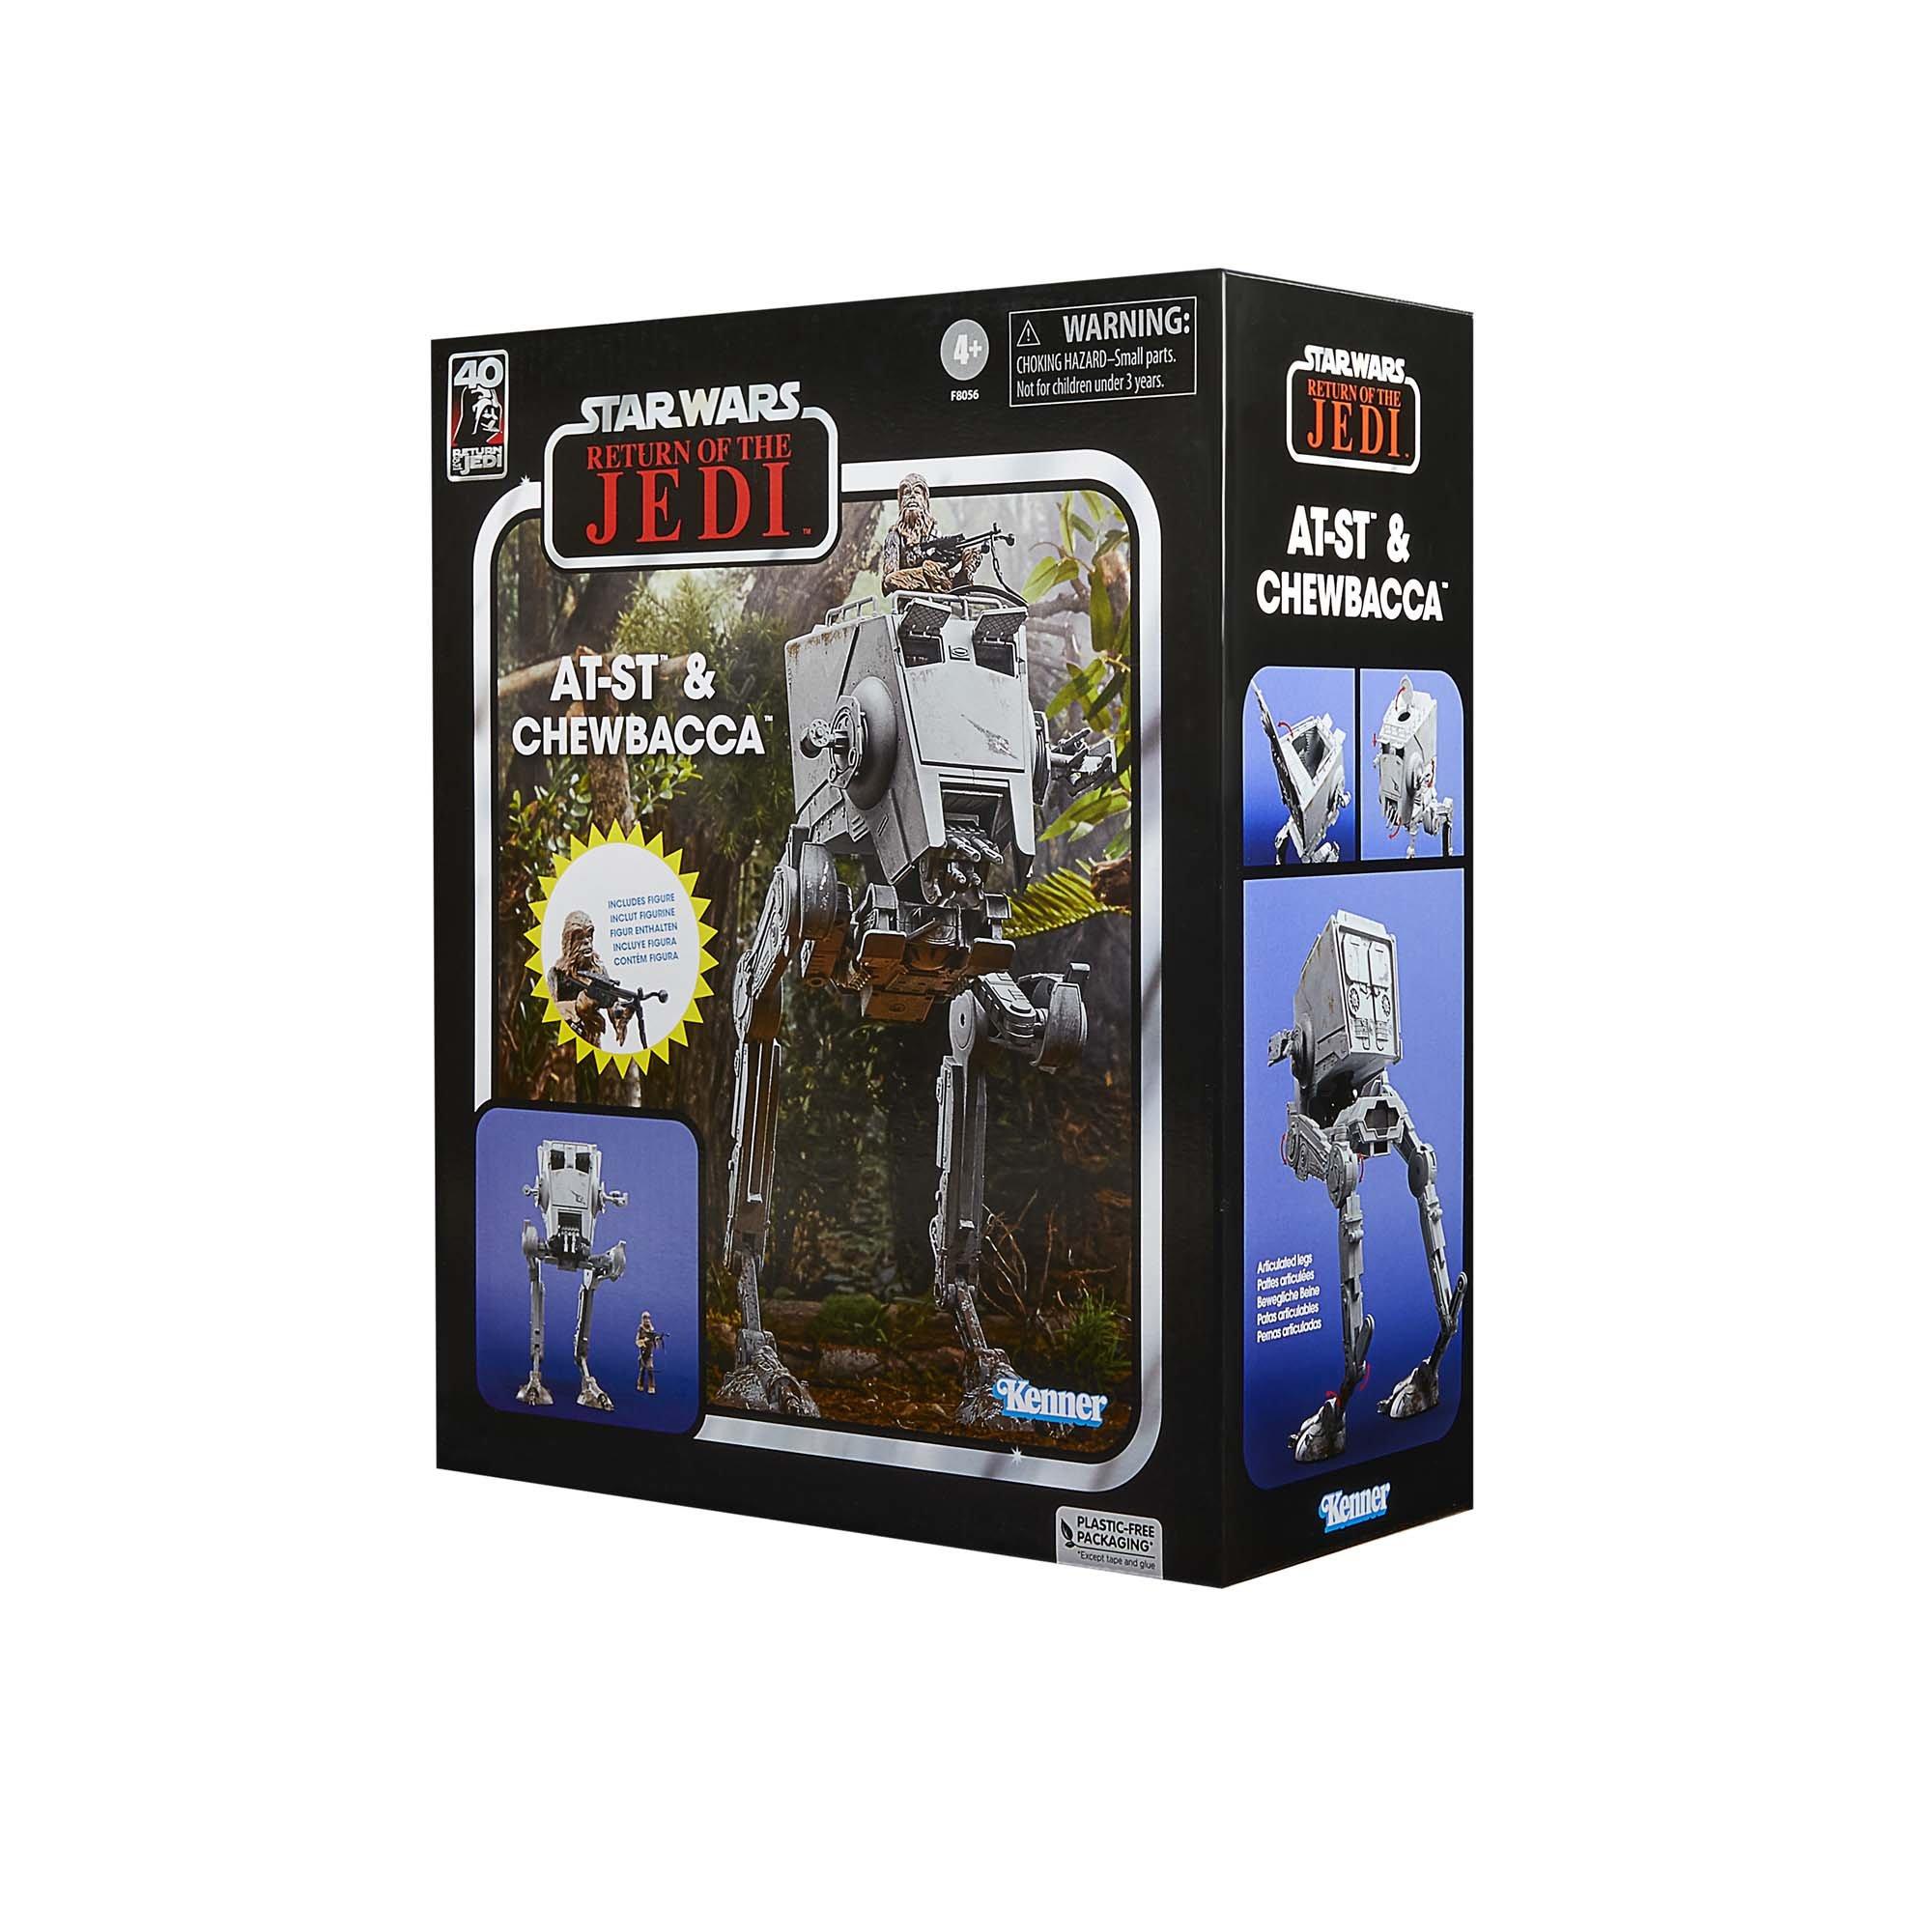 https://media.gamestop.com/i/gamestop/20002283_ALT14/Hasbro-Star-Wars-The-Vintage-Collection-Star-Wars-Return-of-the-Jedi-AT-ST-and-Chewbacca-Figure-Set-2-Pack?$pdp$